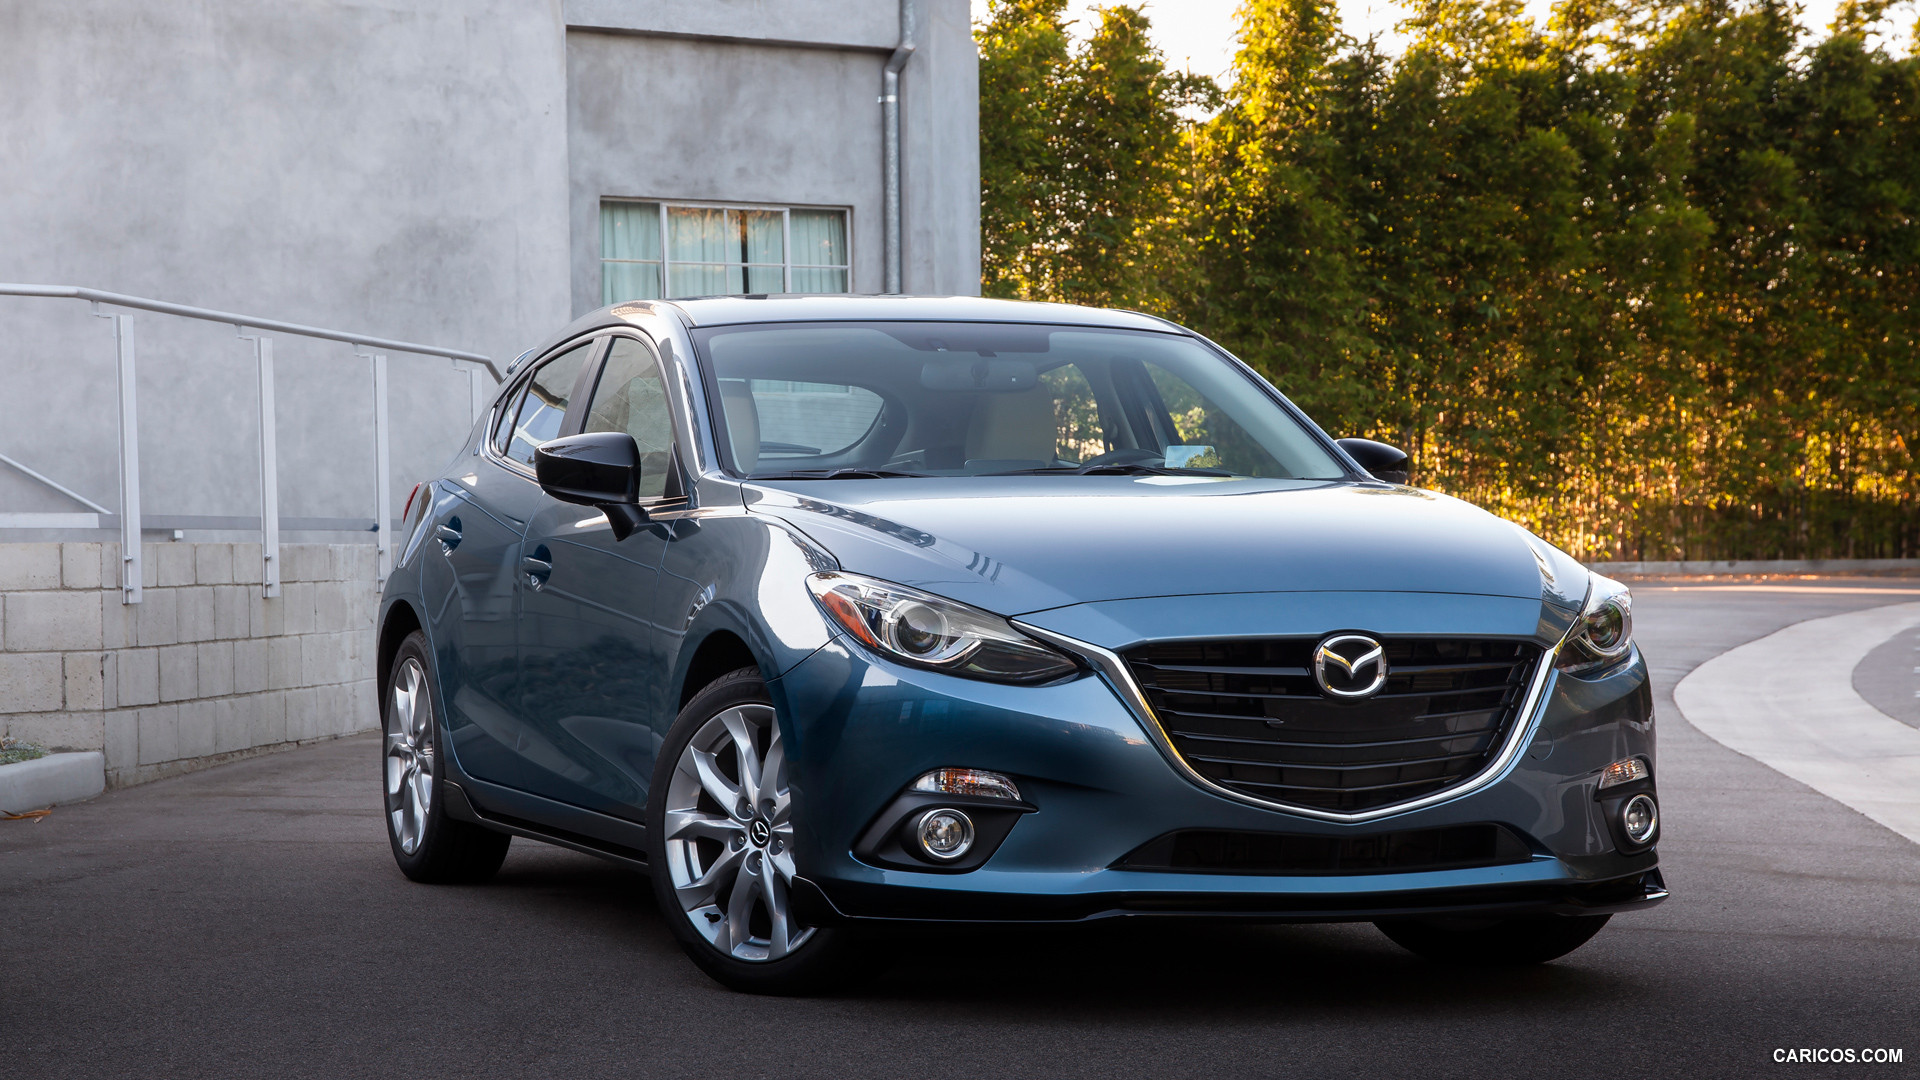 2015 Mazda 3 5D s Touring 6MT (Blue Reflex)  - Front, #17 of 27